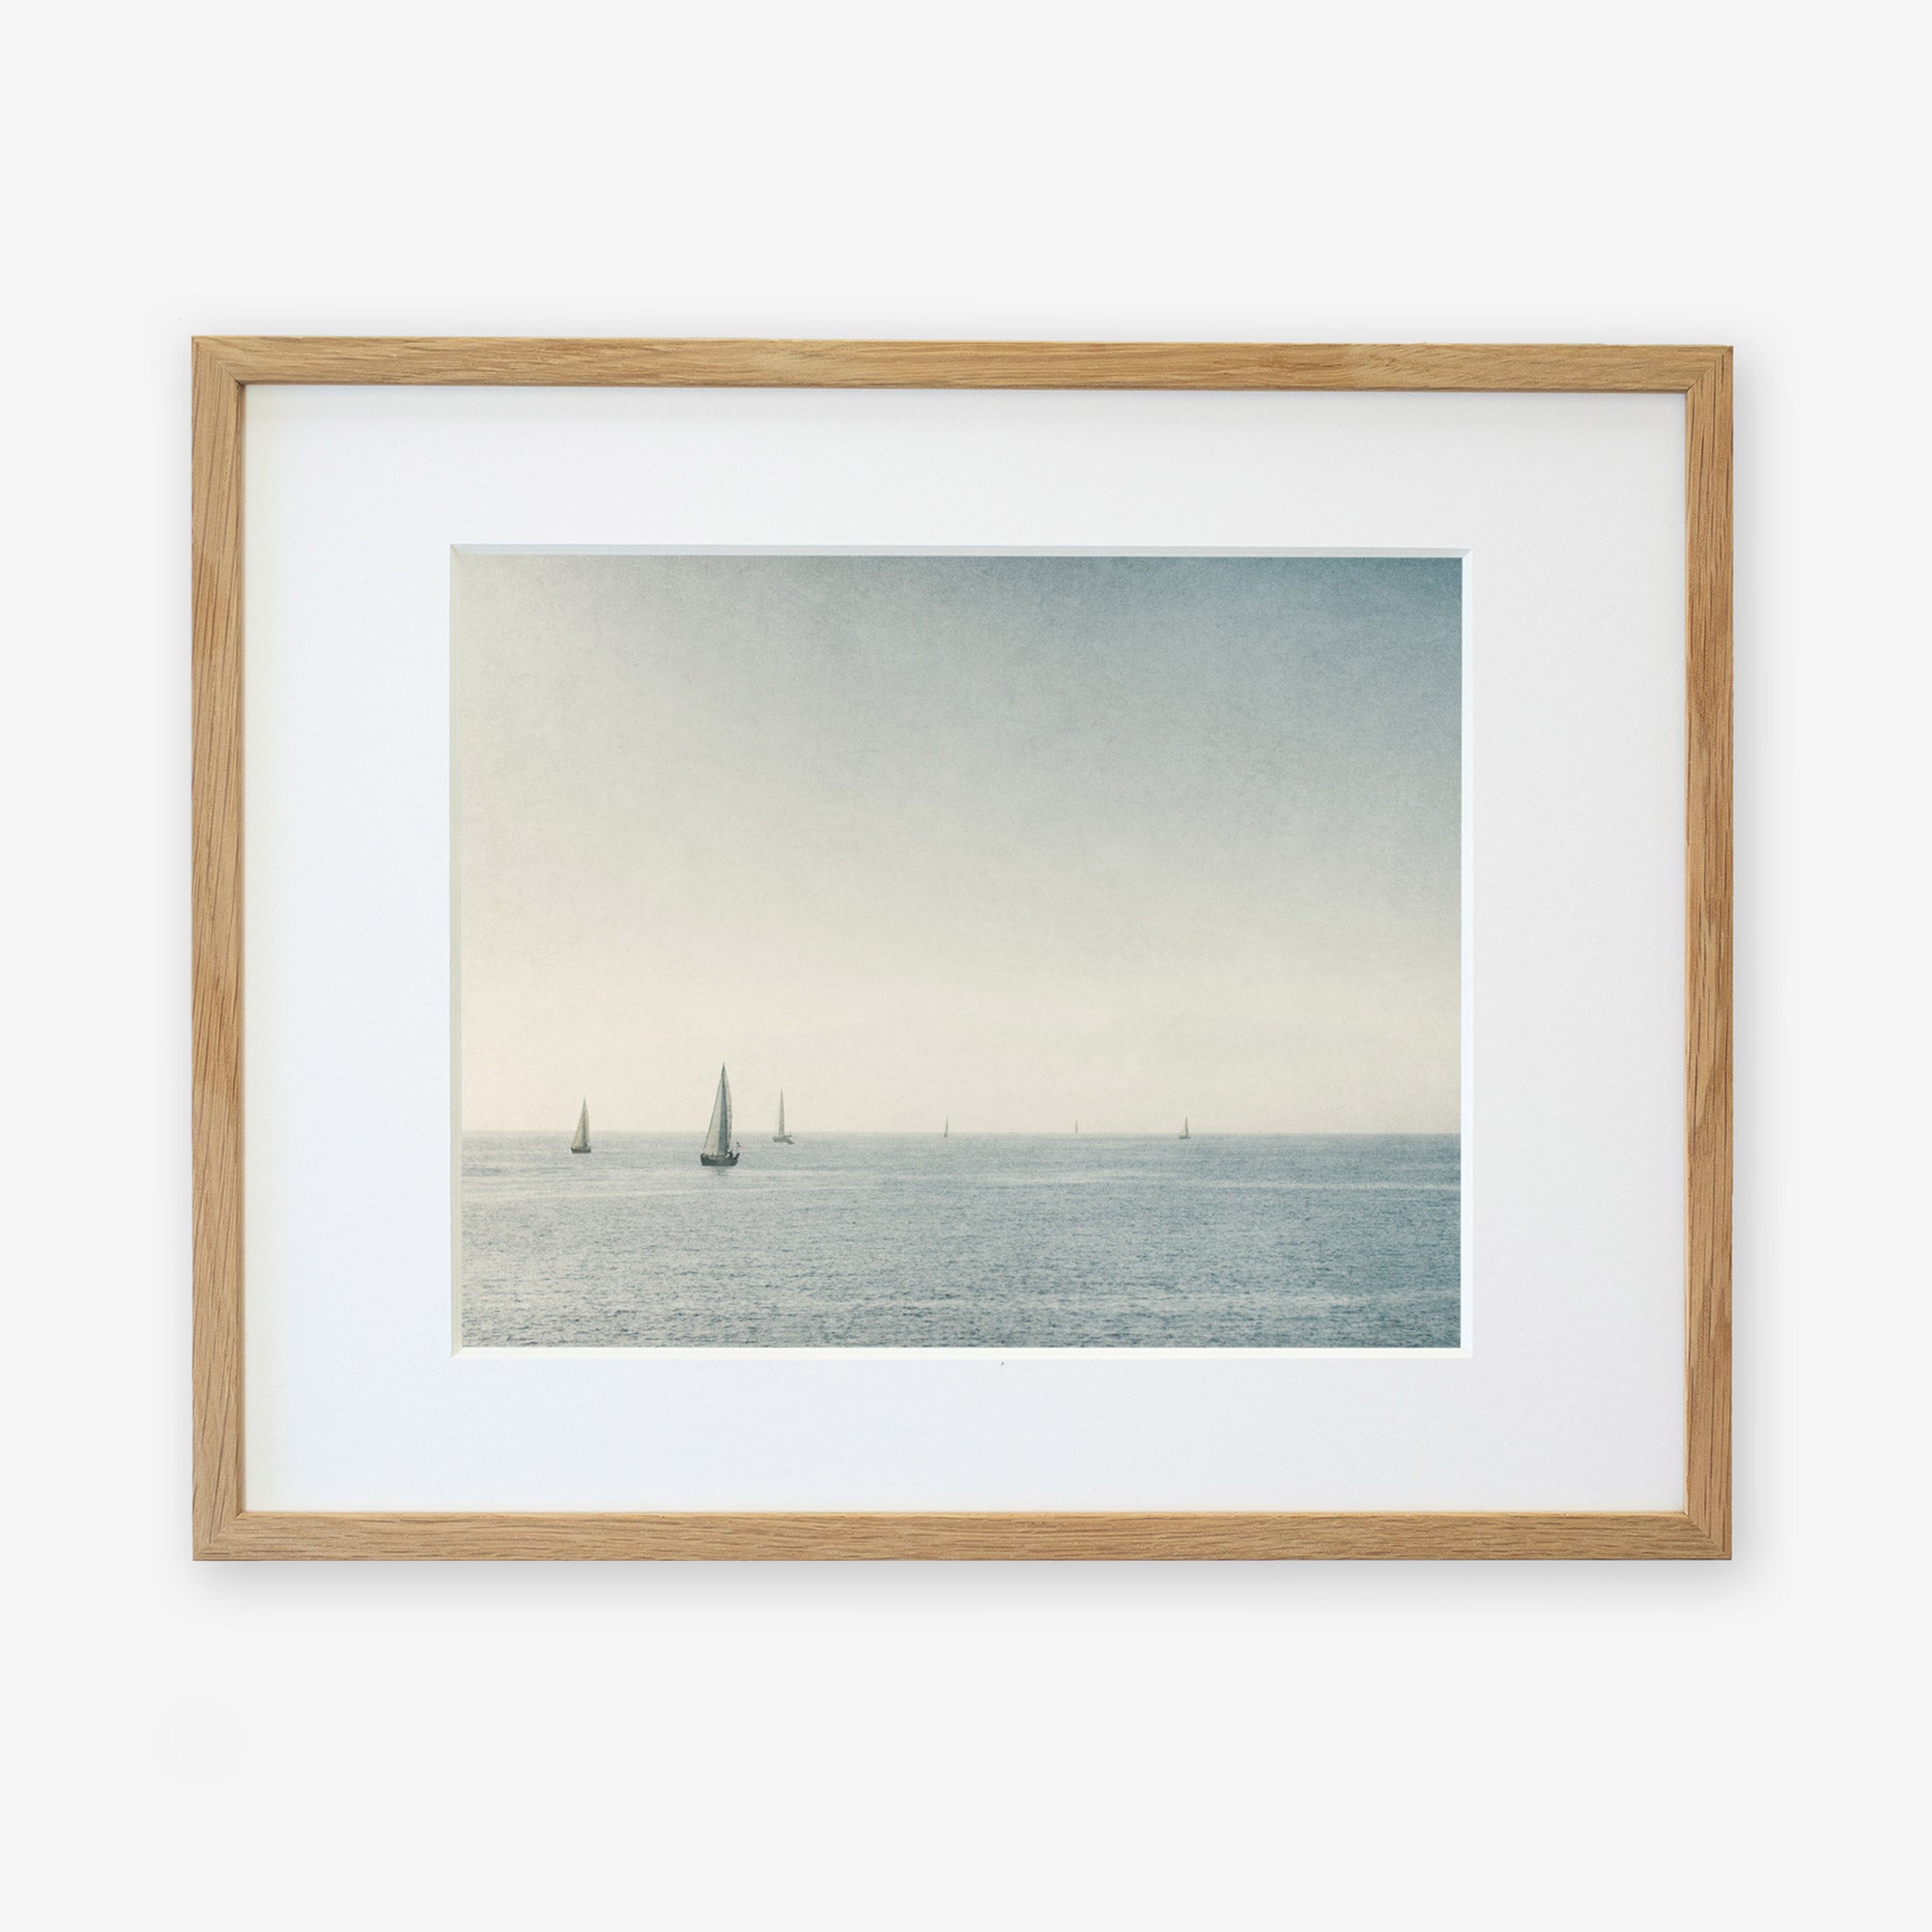 Framed artwork depicting a calm seascape with multiple sailboats on the horizon under a light blue sky, printed on archival photographic paper and enclosed in a light wooden frame with a white mat border: Moody Nautical Seascape Print, &#39;Sail Boats Approaching&#39; by Offley Green.